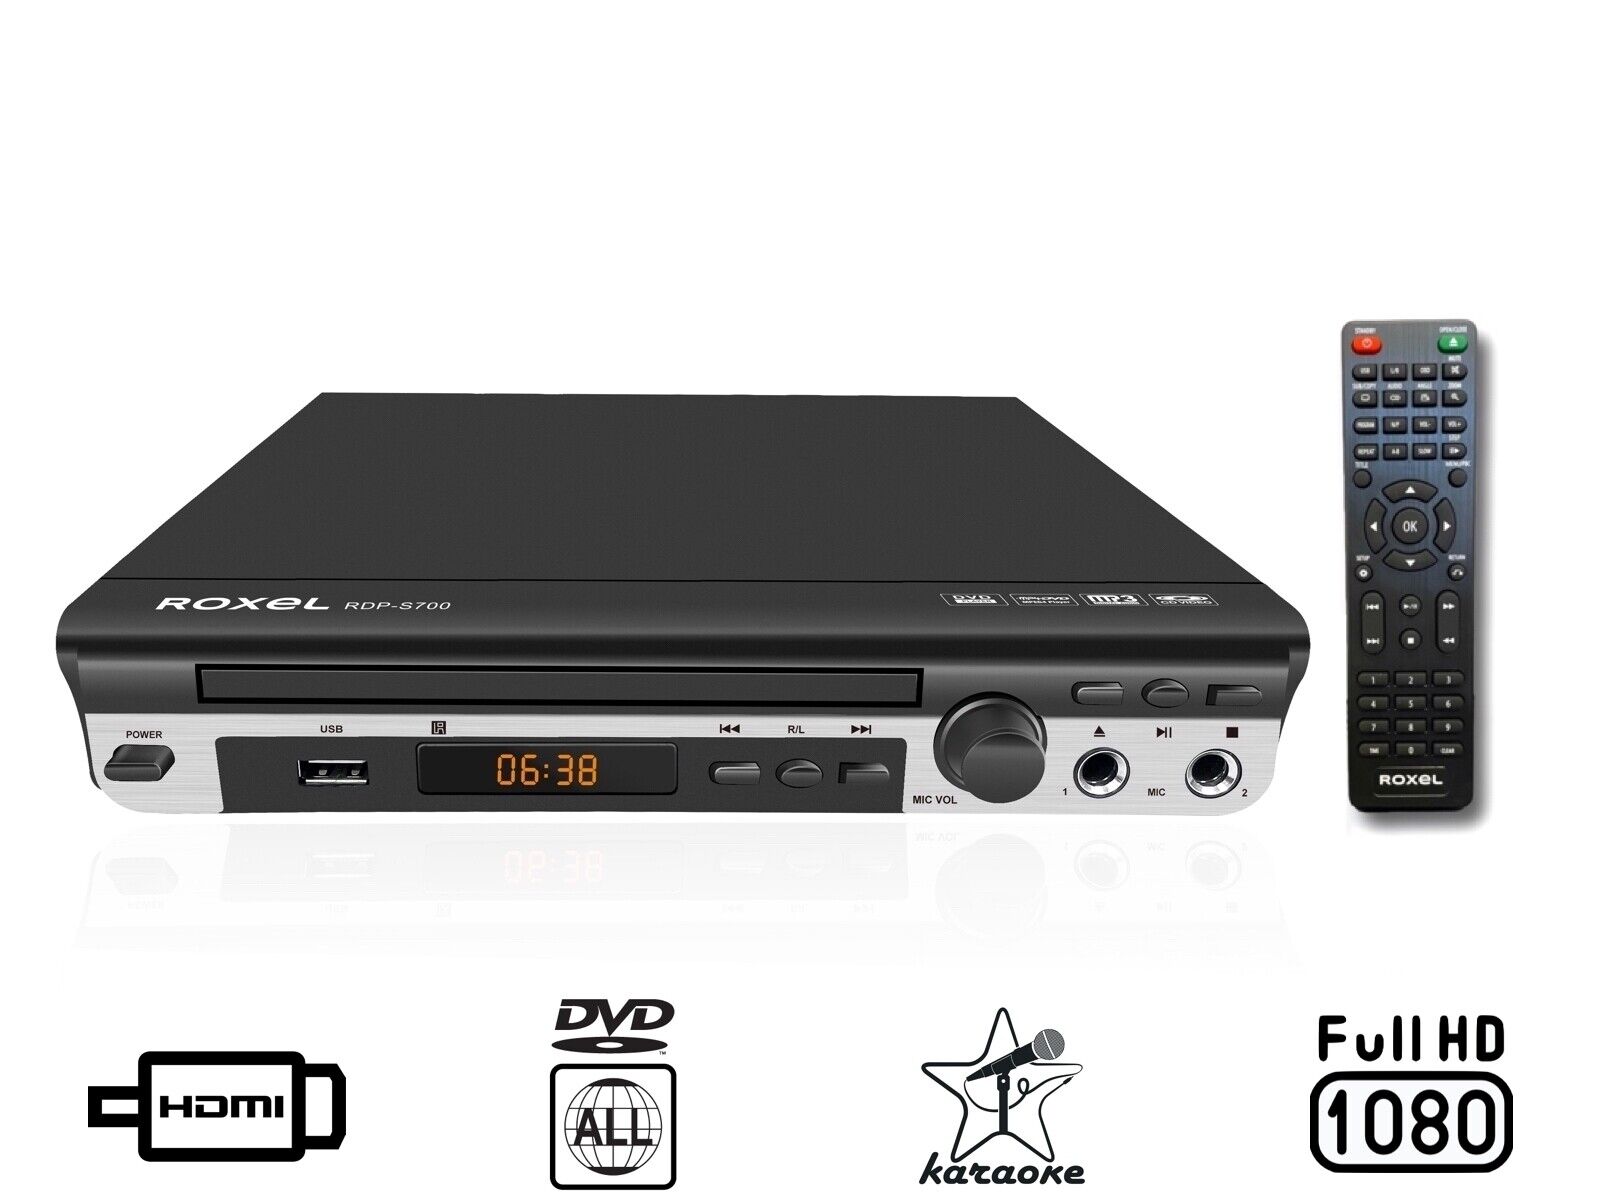 DVD Player Multi All Region 1080p, Remote and HDMI Cable Karaoke USB, Roxel S700